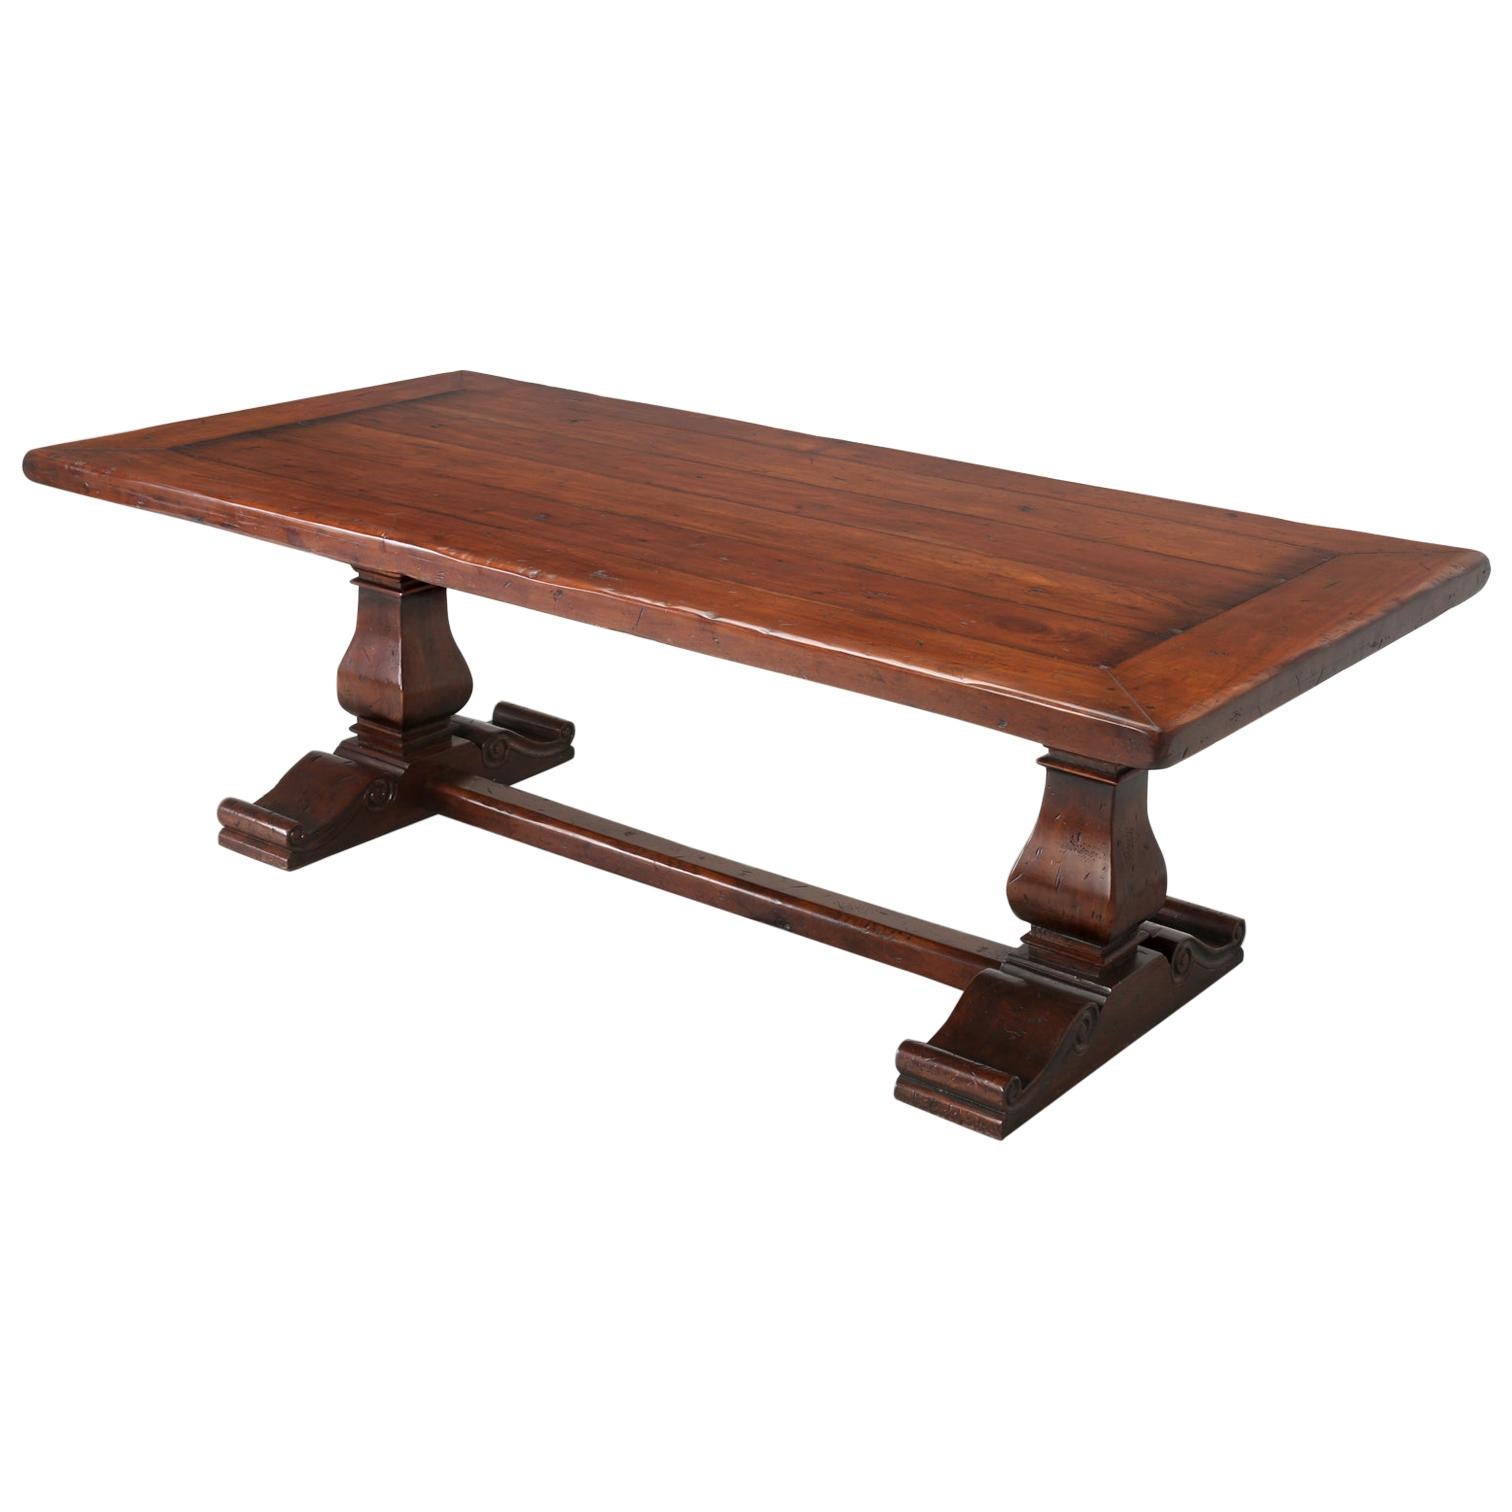 French Inspired Trestle Dining Table Constructed in a Heavy and Thick Hardwood